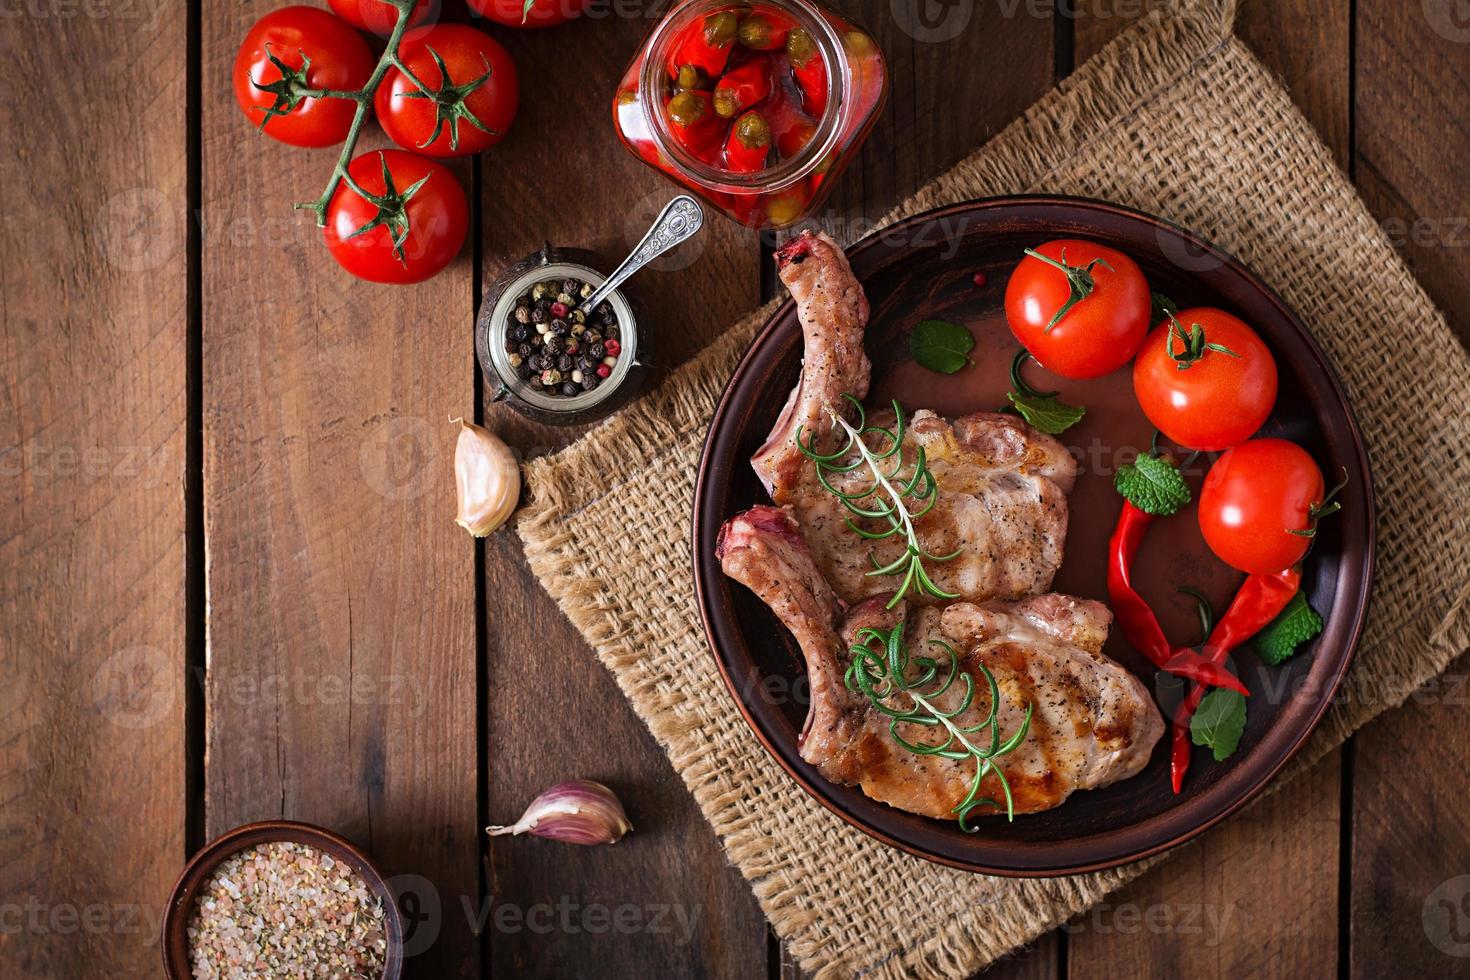 Grilled juicy steak on the bone with vegetables on a wooden background. Top view photo